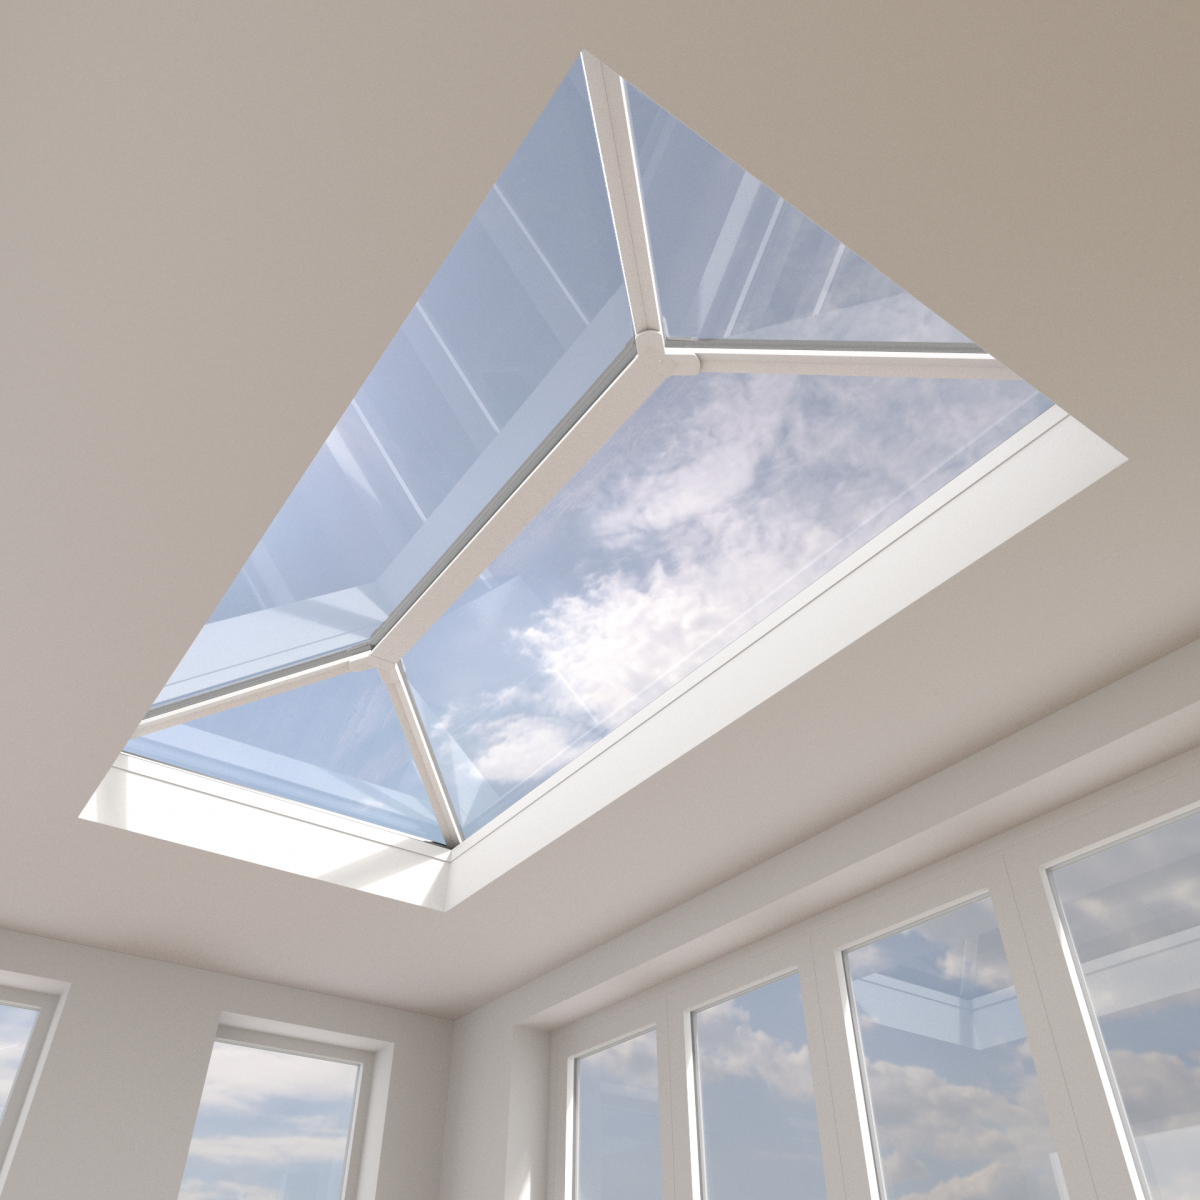 9 Ways Homeowners Can Reduce Their Carbon Footprint with Our Stratus Roof Lantern